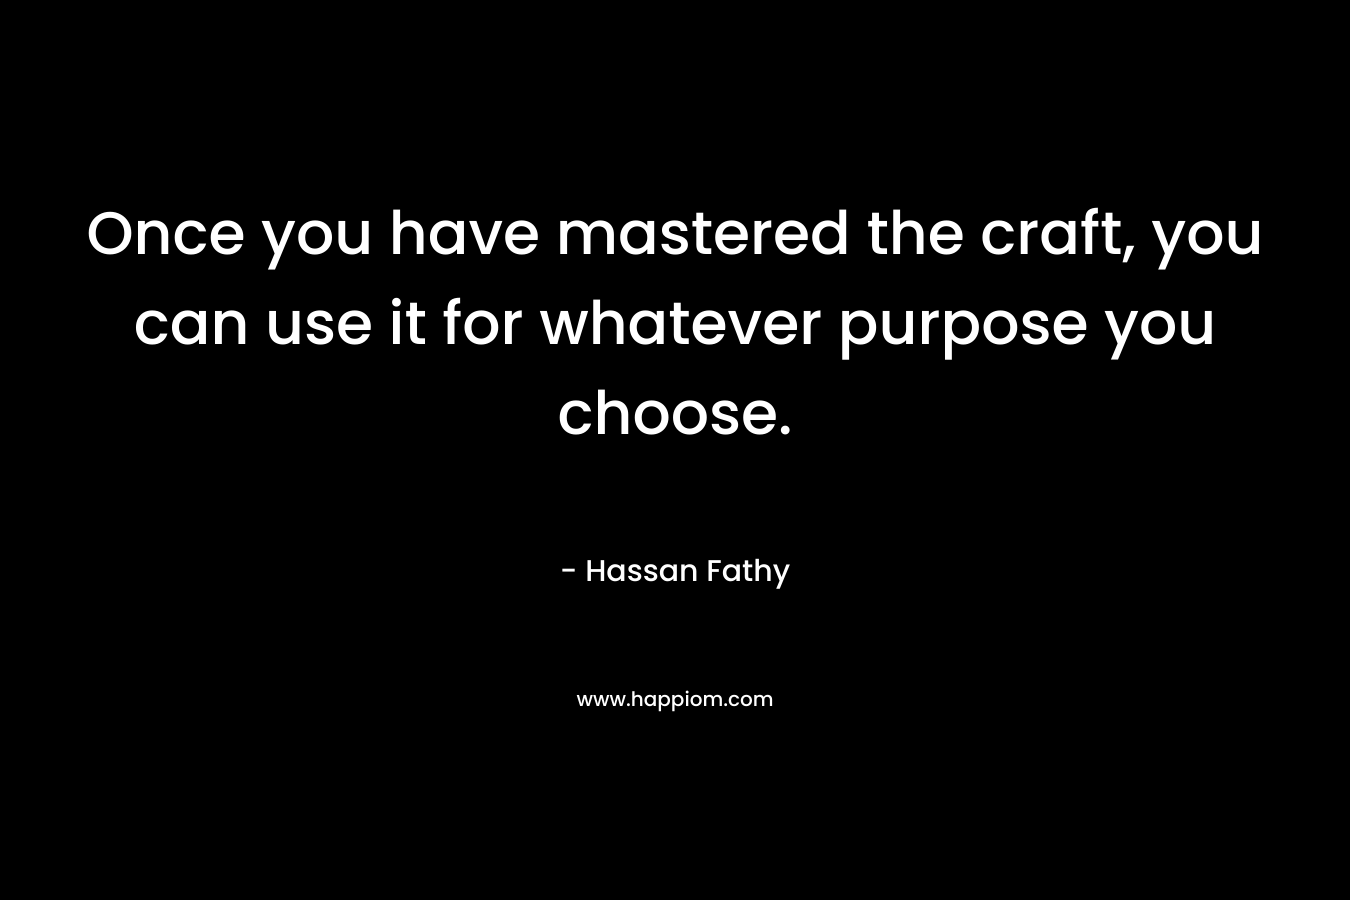 Once you have mastered the craft, you can use it for whatever purpose you choose.